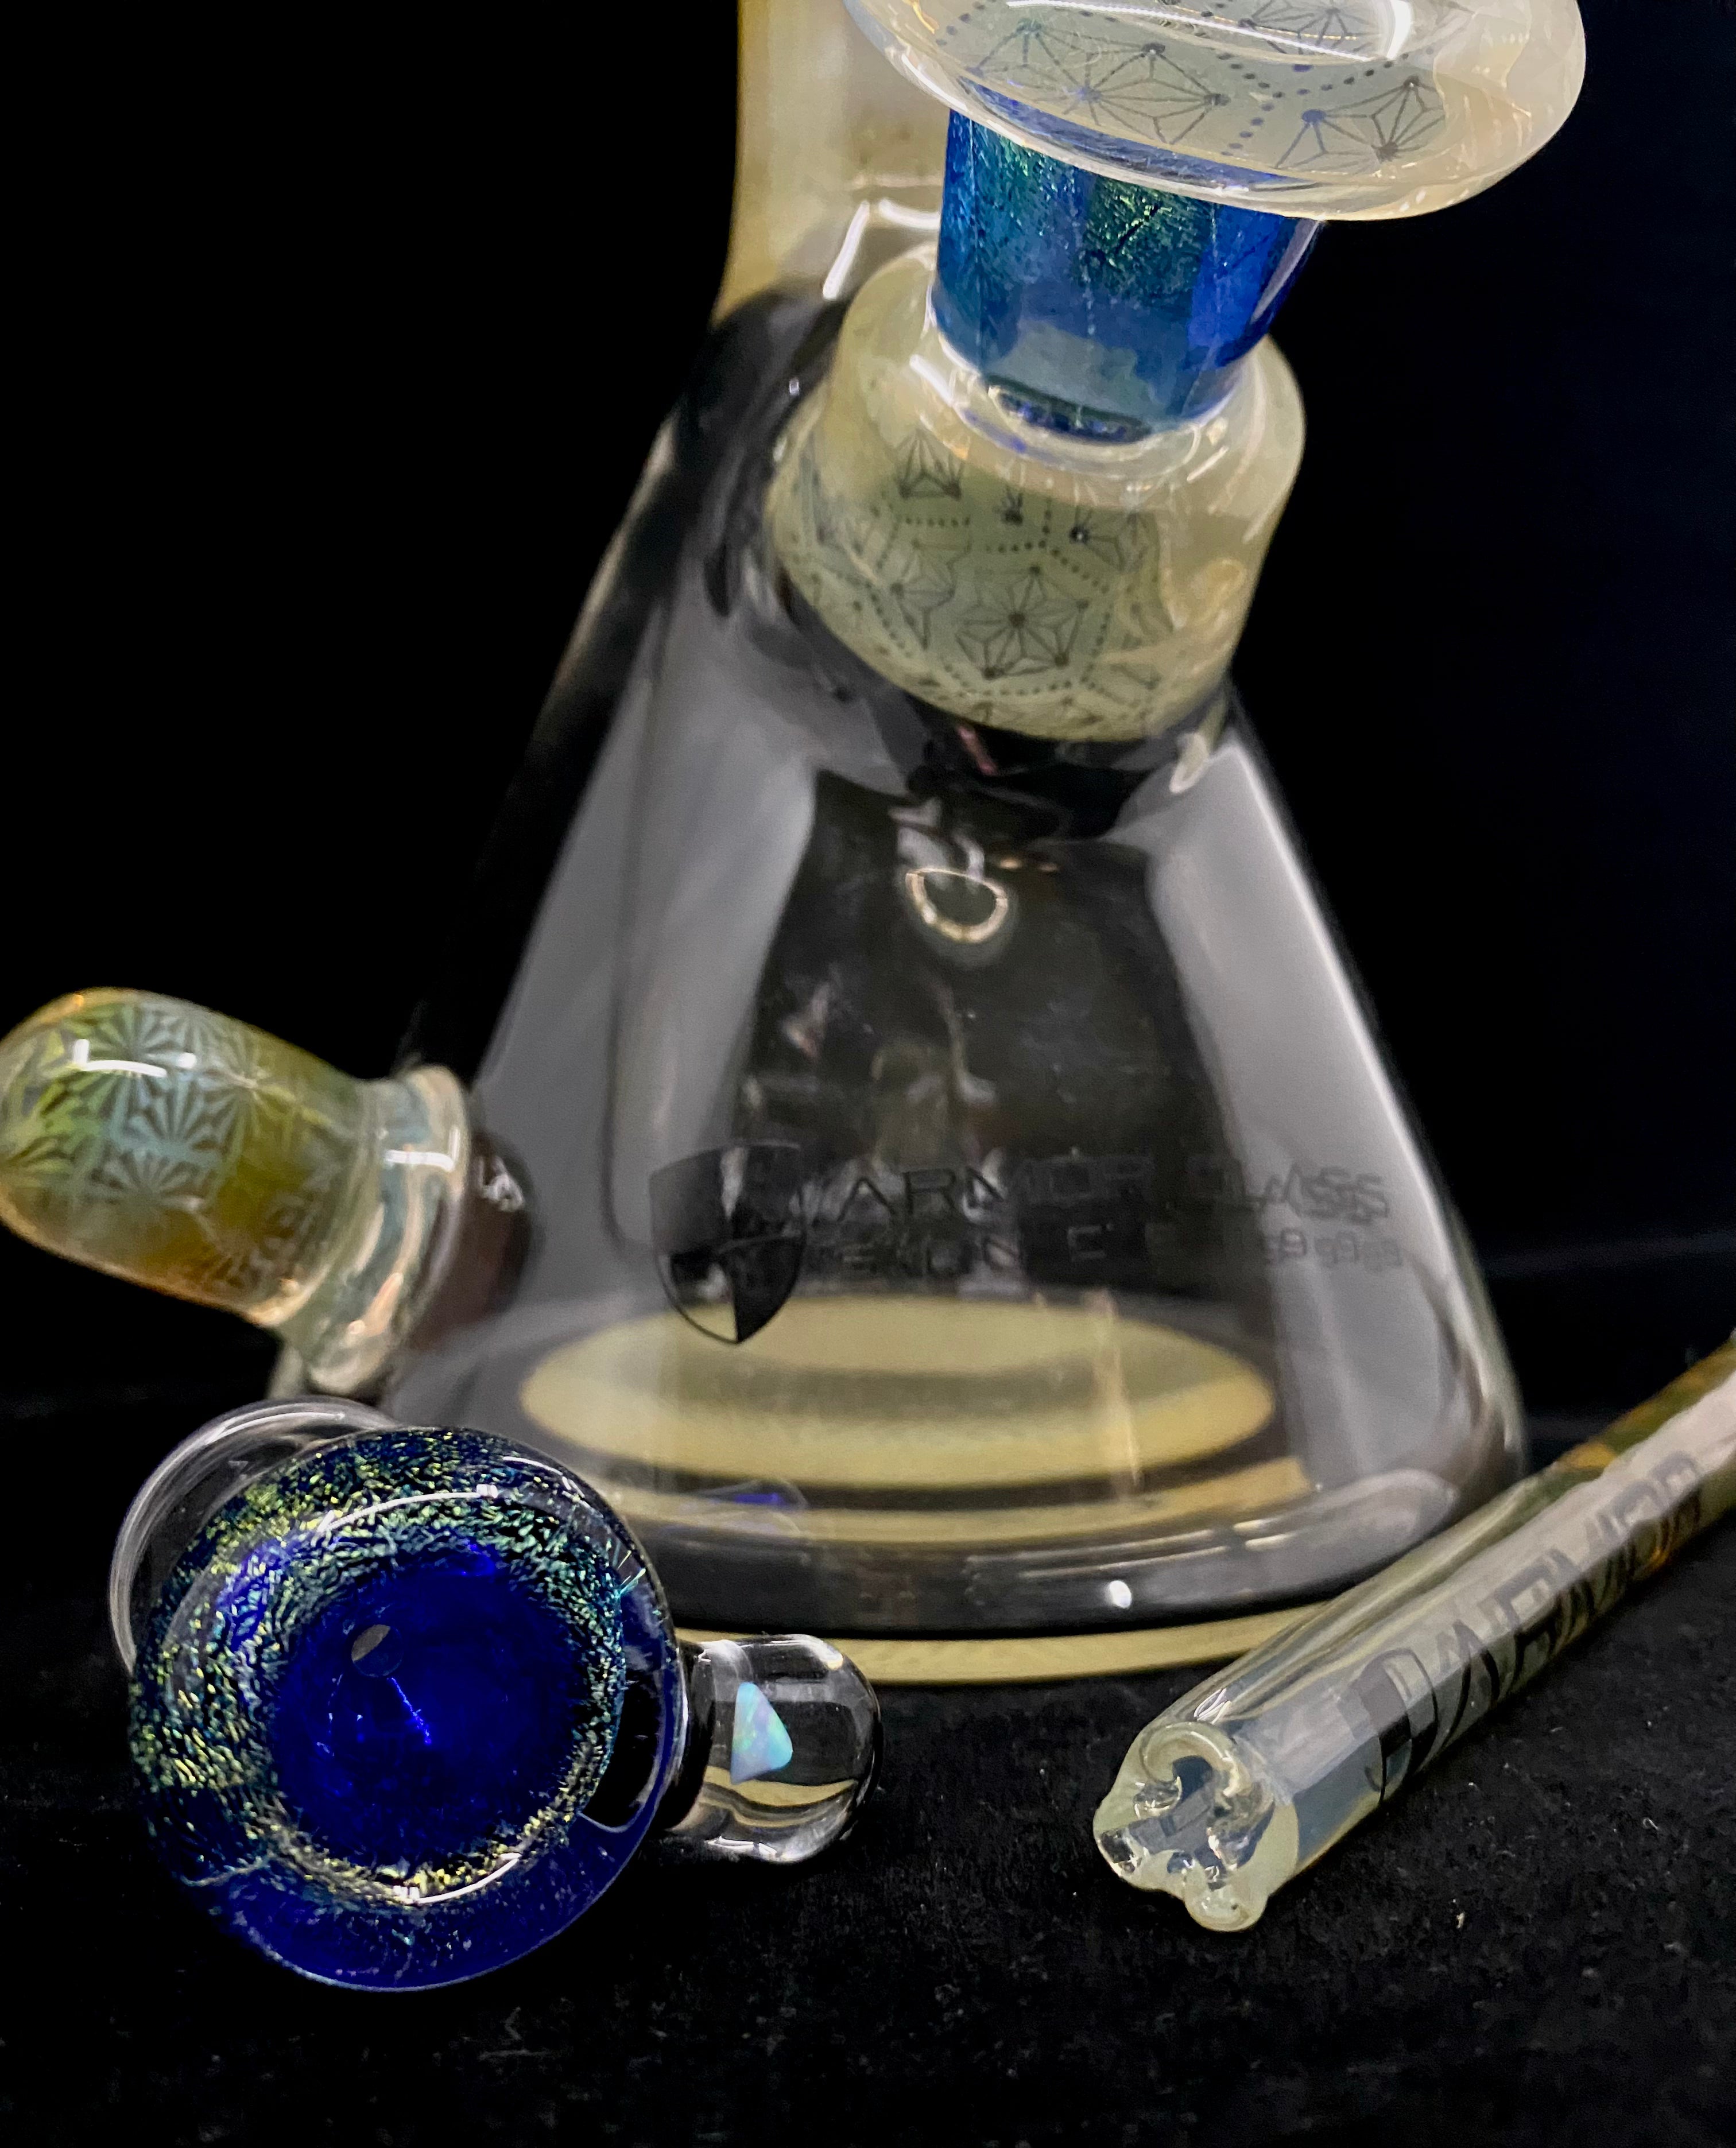 Armor Glass 12" Worked Fume & Dichro Accent Beaker